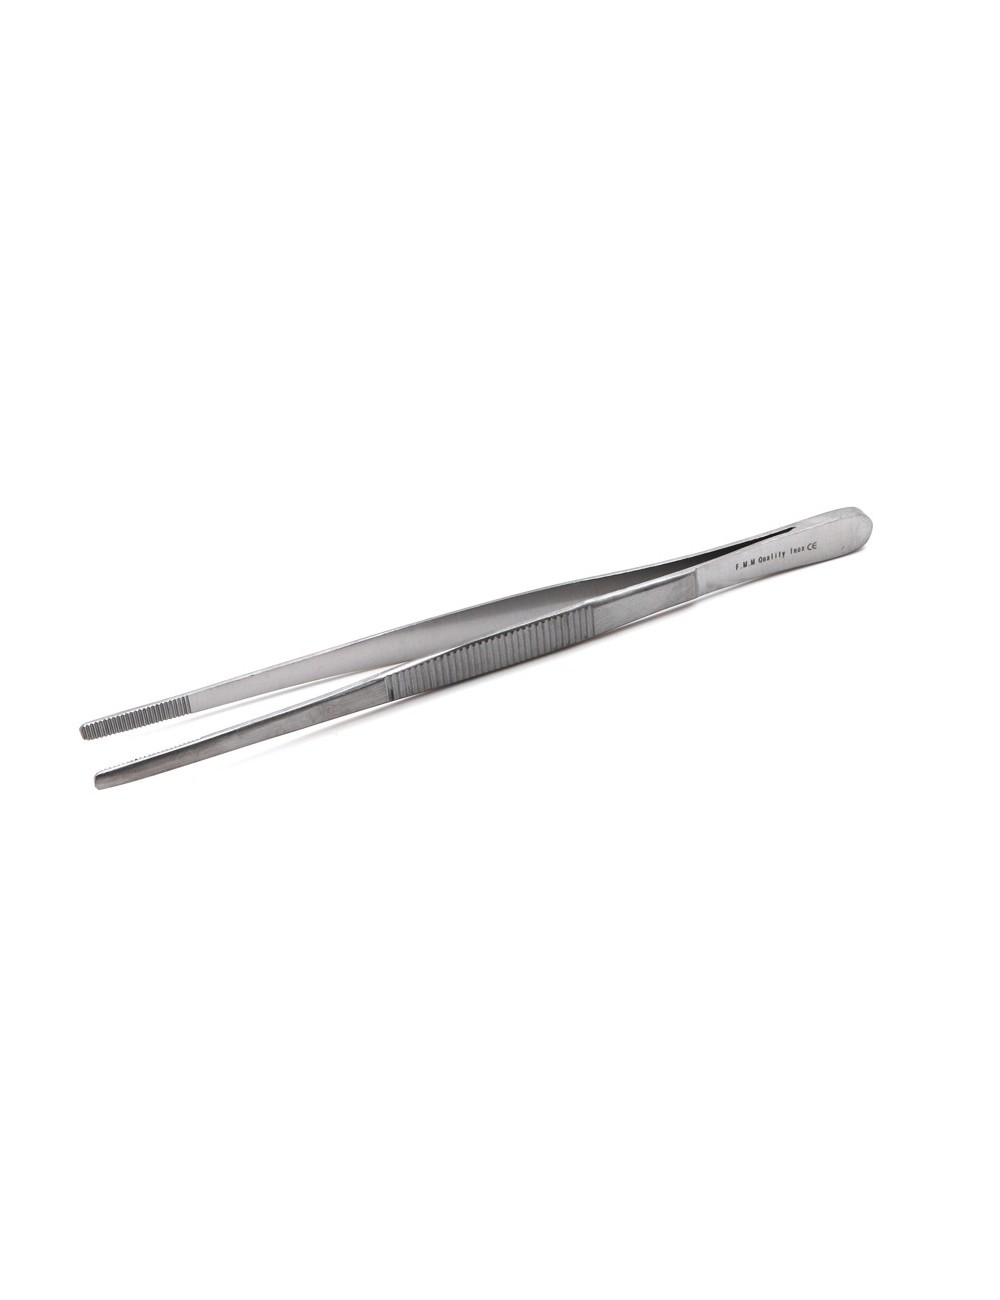 PINCE DISSECTION S/G 18 CM